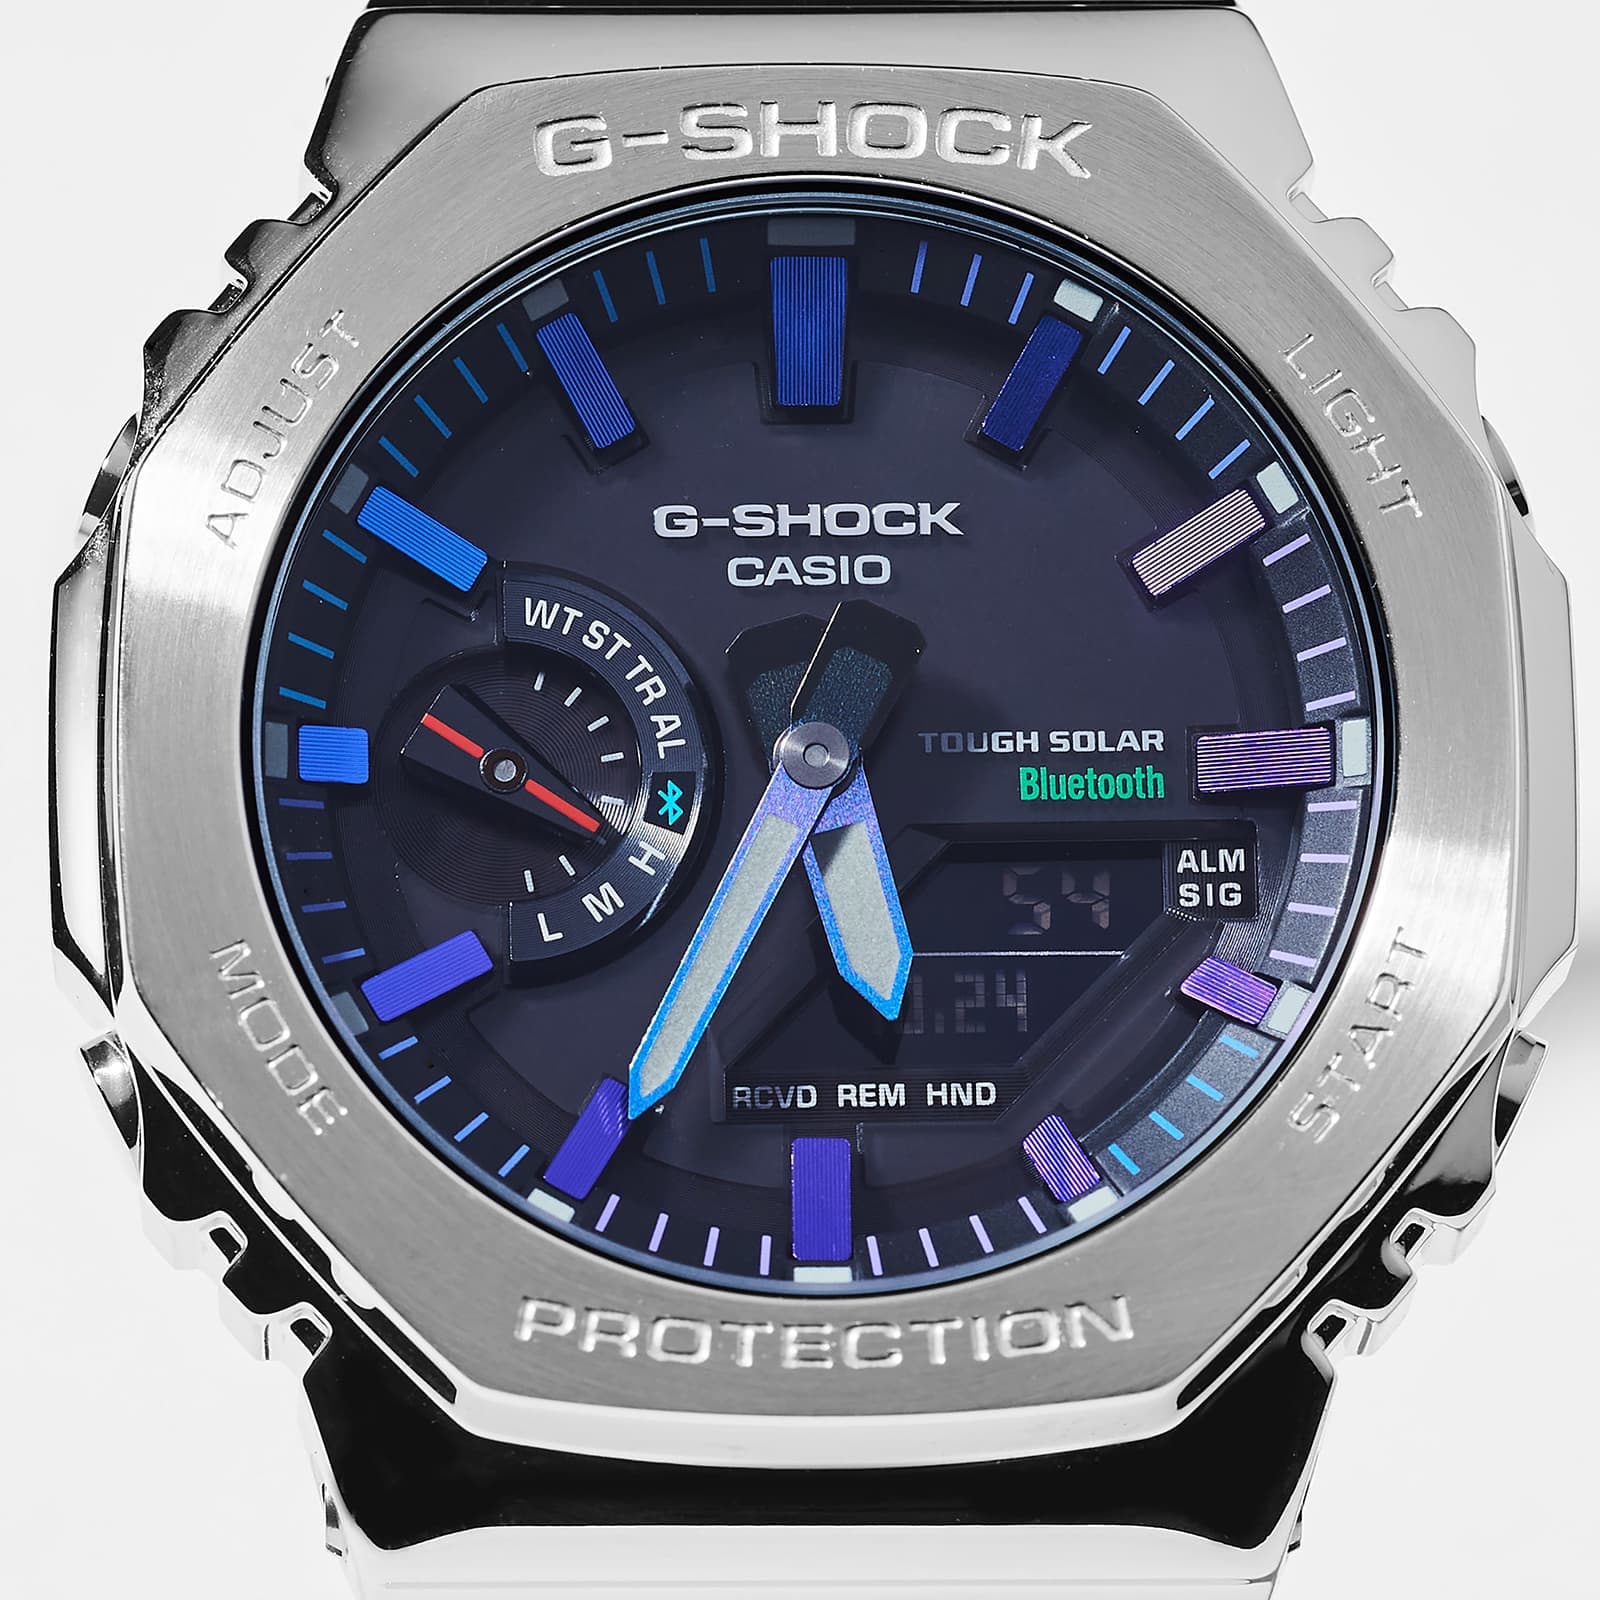 Full metal “G-Shock” with eye-catching rainbow colors 3